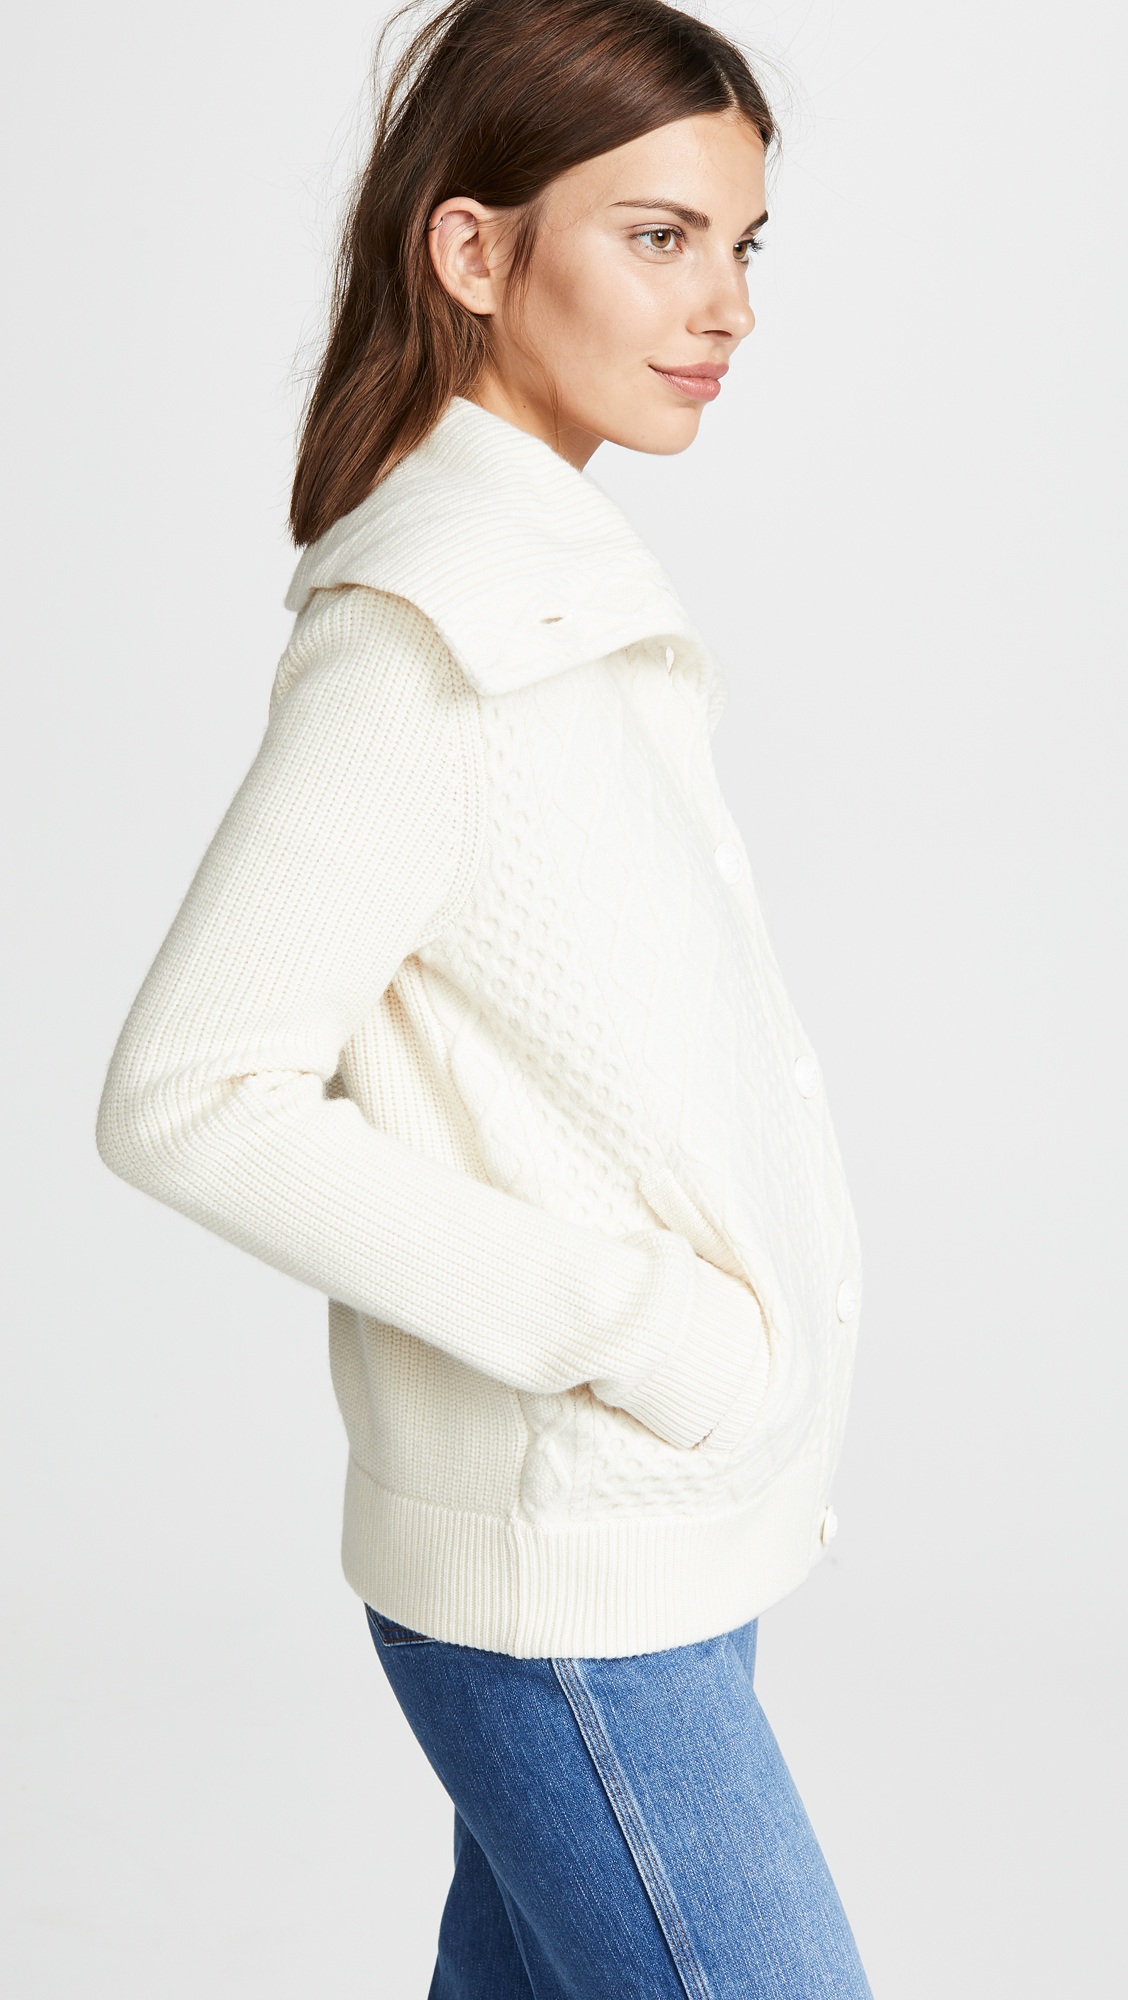 tory-burch-thea-cardigan-cable-knit-white-ivory-womens - Katie Considers